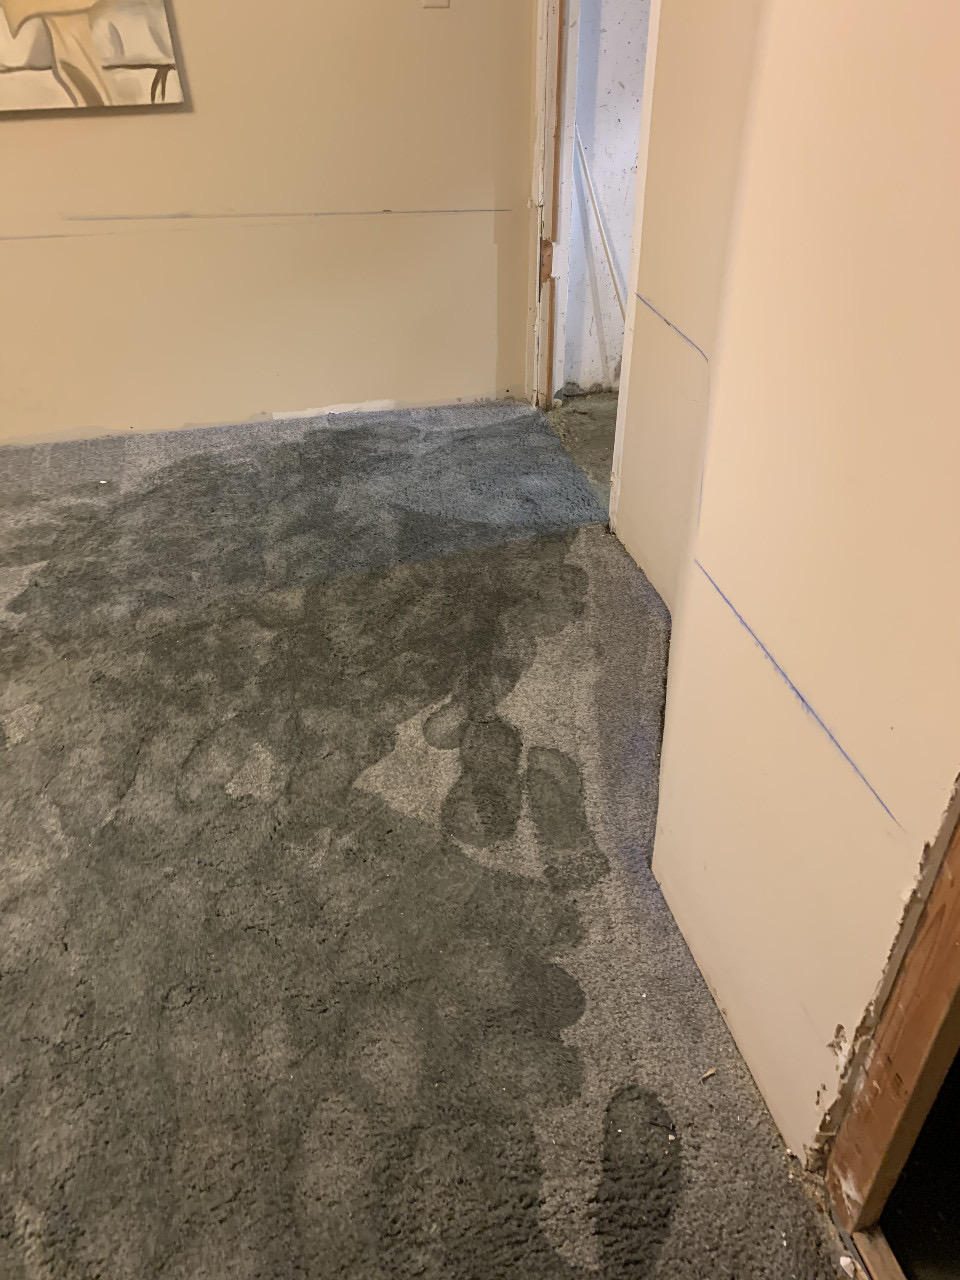 Water backups in Minneapolis homes without drain tile.